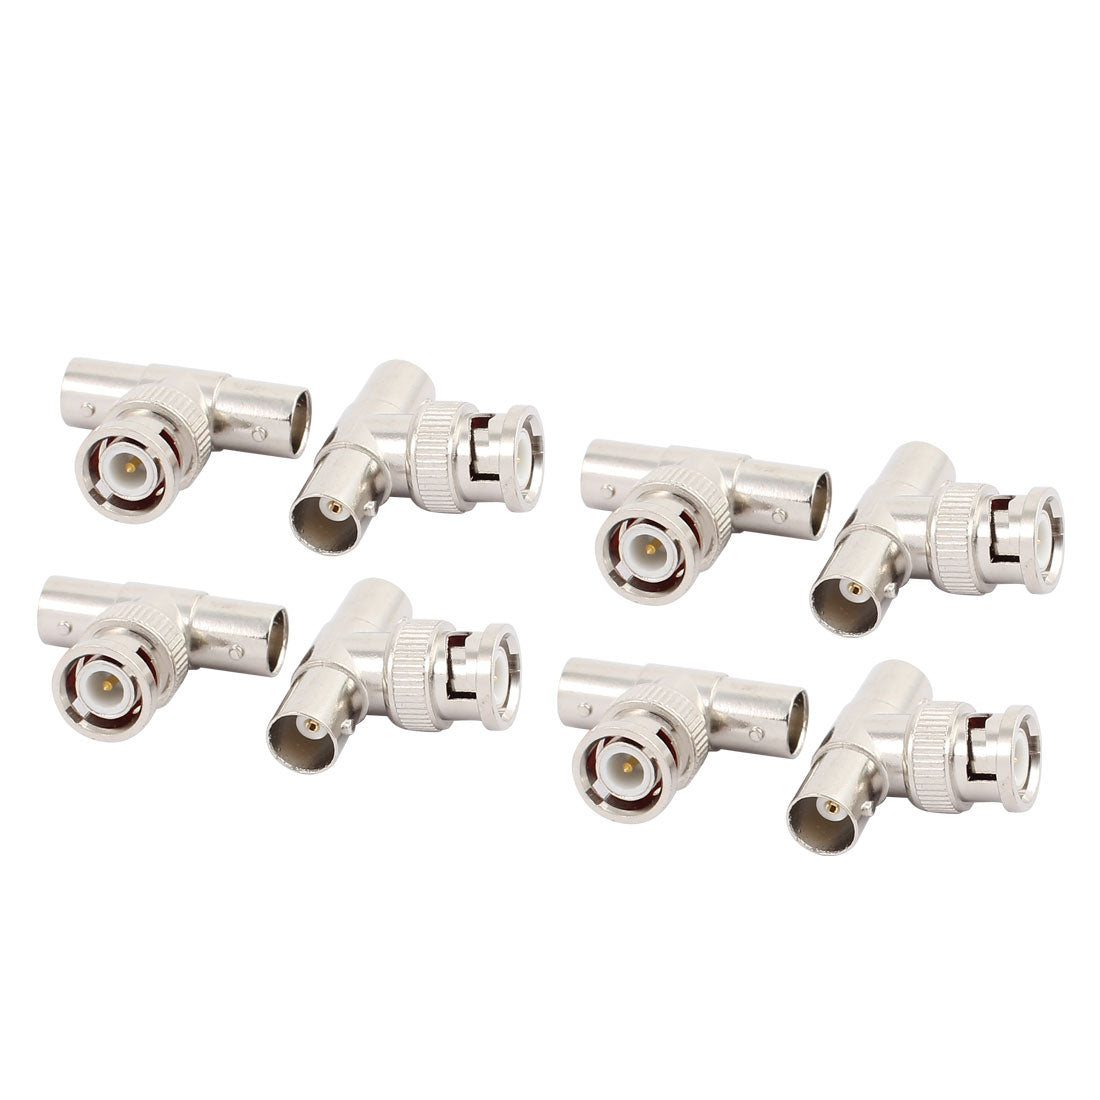 uxcell Uxcell 8Pcs T type 1 BNC Male to 2 BNC Female Jack RF Connector Adapter for CCTV Camera